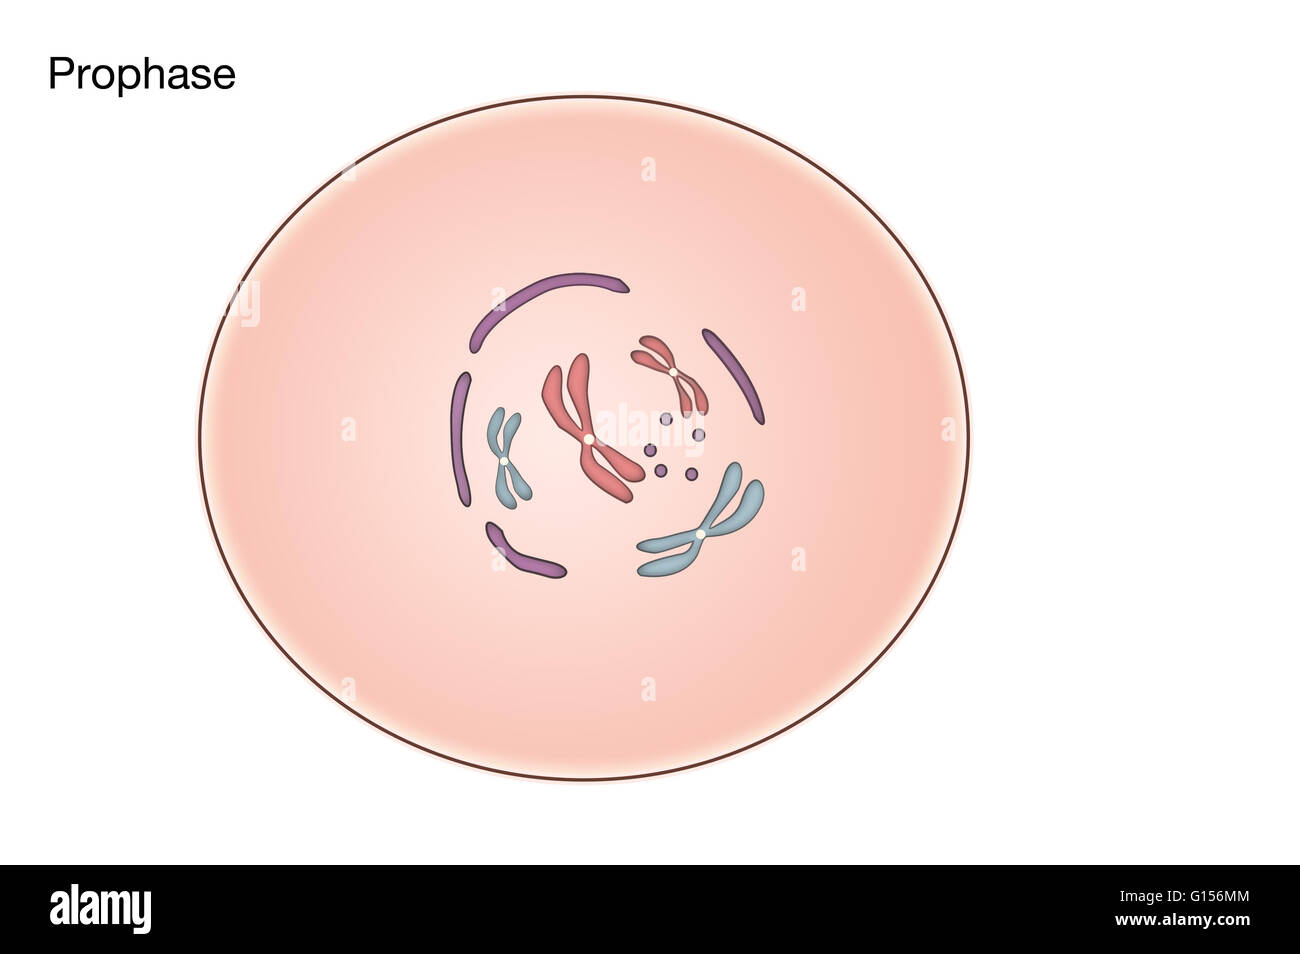 Diagram of Prophase of Mitosis in an animal cell Stock Photo - Alamy